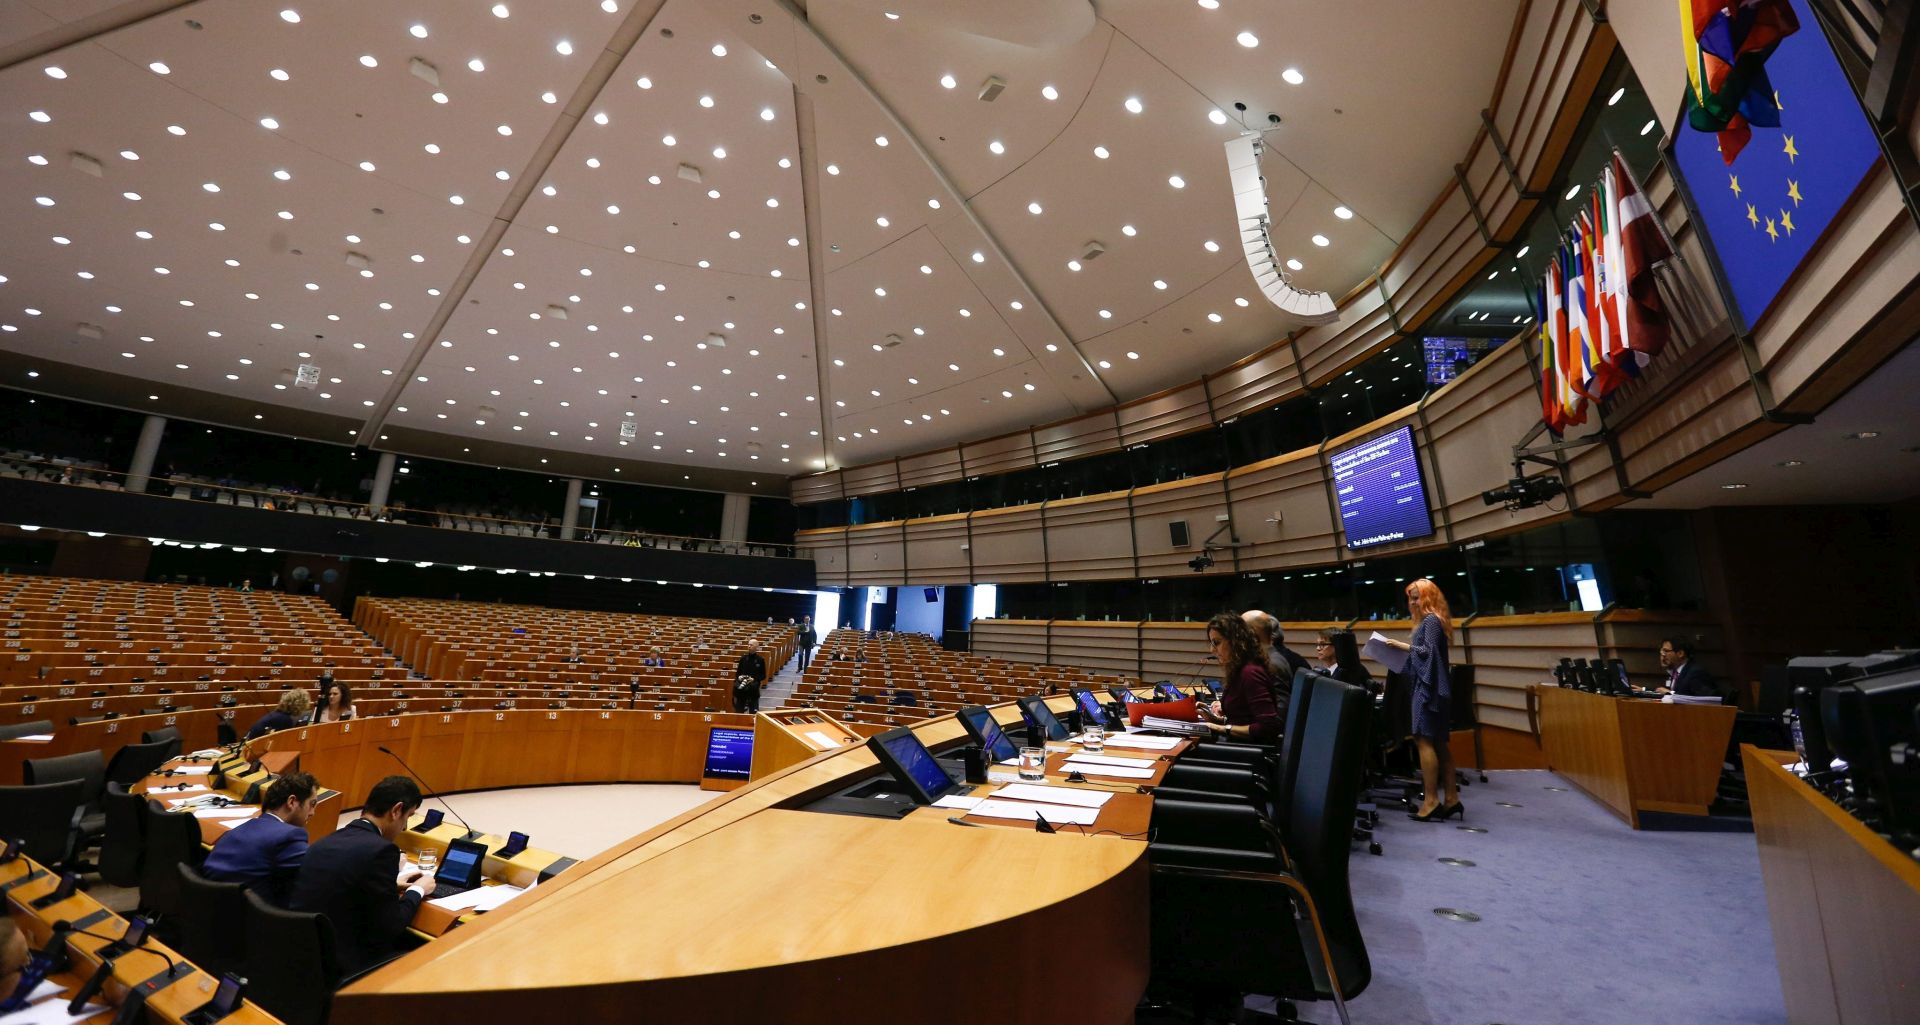 epa05280840 View of the Hemicyle during a plenary session at the European Parliament in Brussels, Belgium, 28 April 2016. Legal aspects, democratic control and implementation of the EU-Turkey agreement - Council and Commission statements  EPA/LAURENT DUBRULE